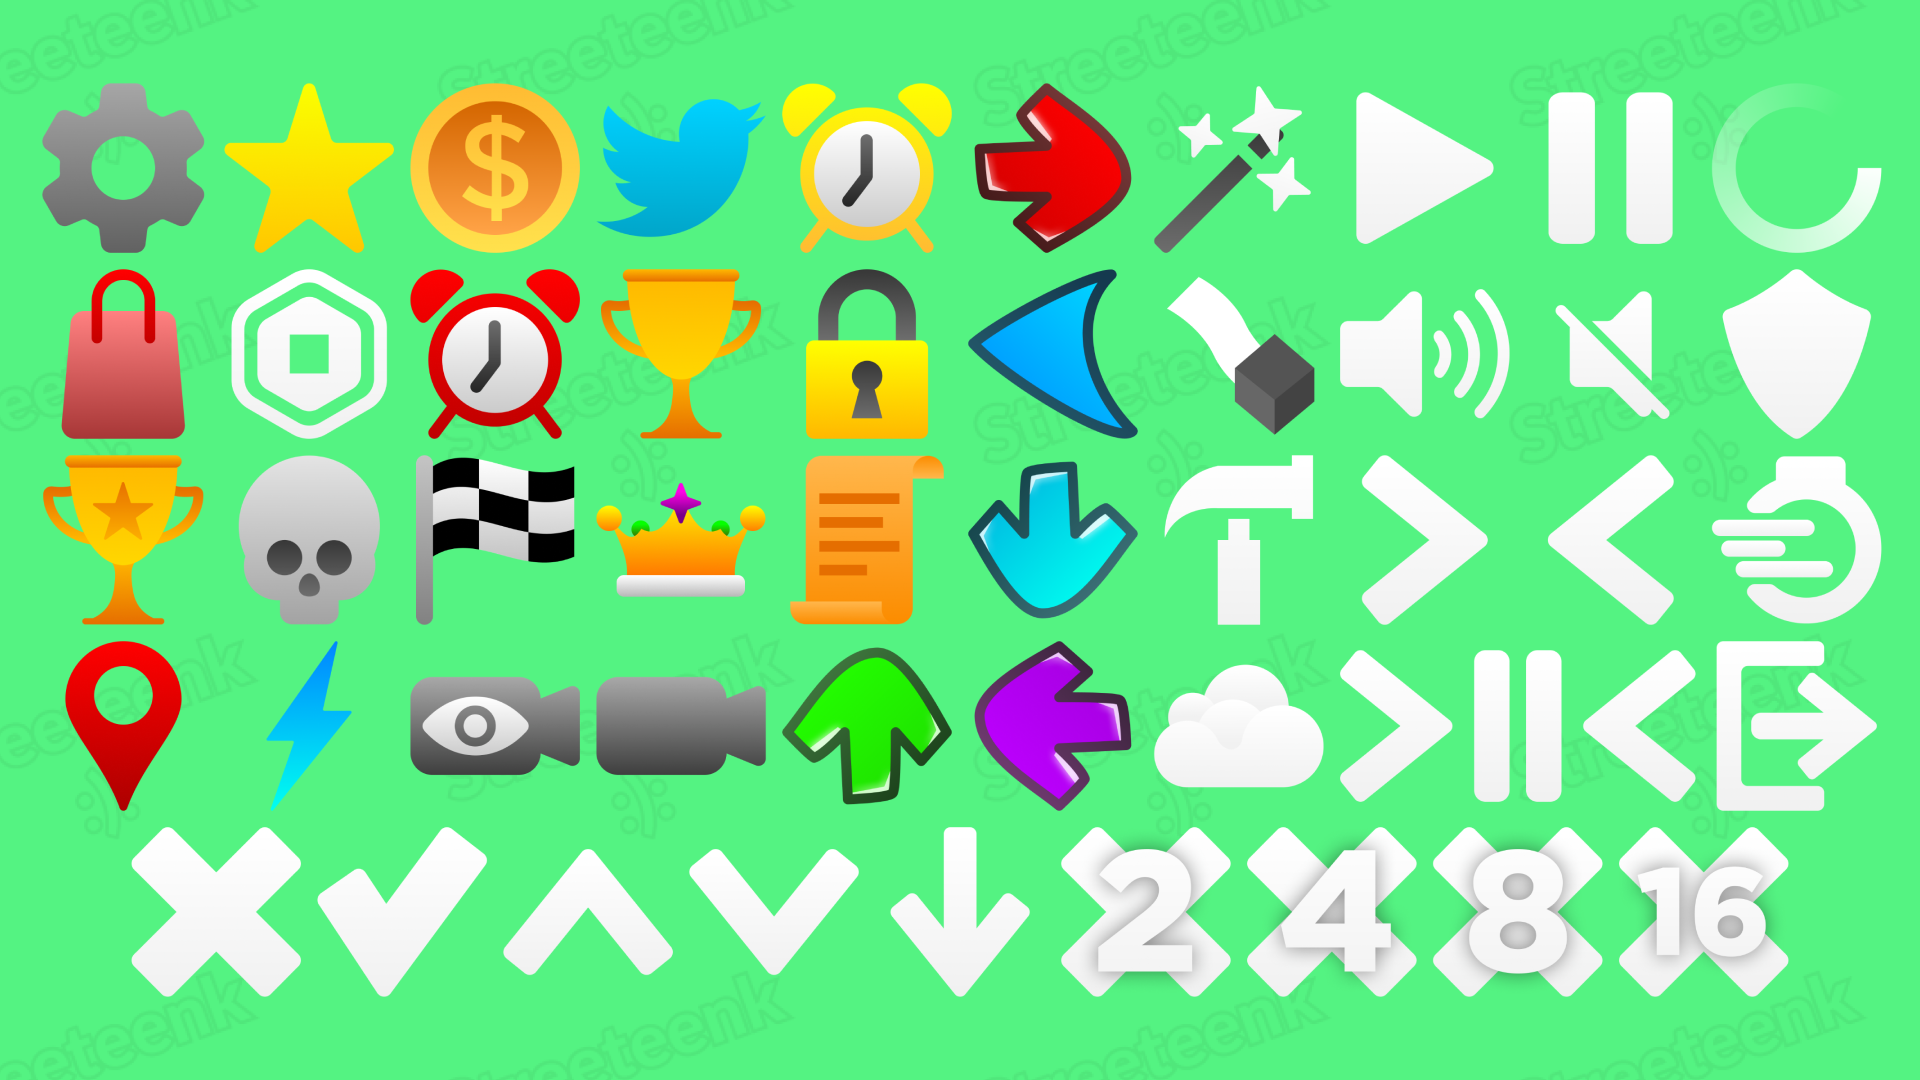 Roblox Icon, Simpleicons Brands Iconpack